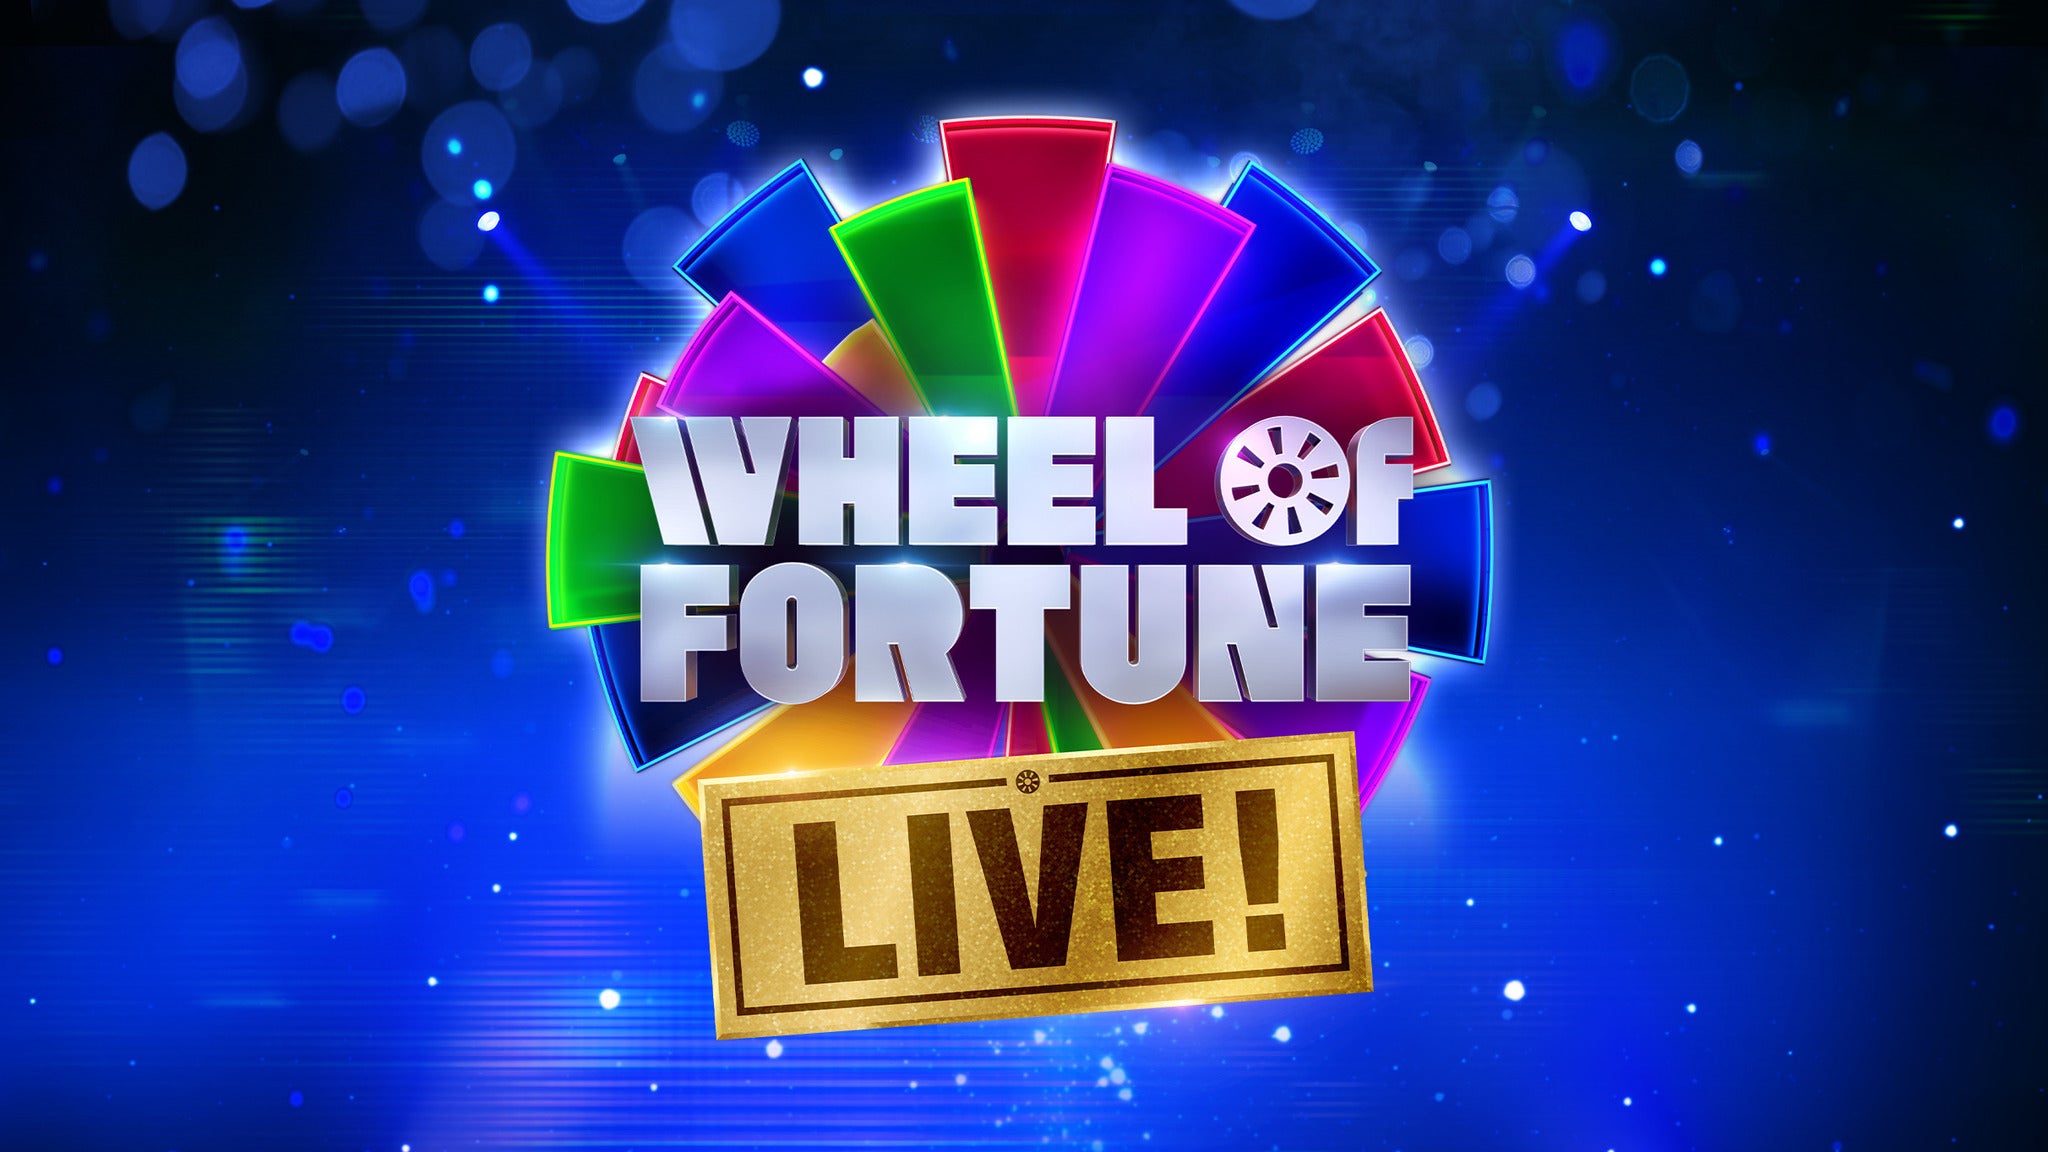 Wheel Of Fortune Live! pre-sale password for genuine tickets in Virginia Beach